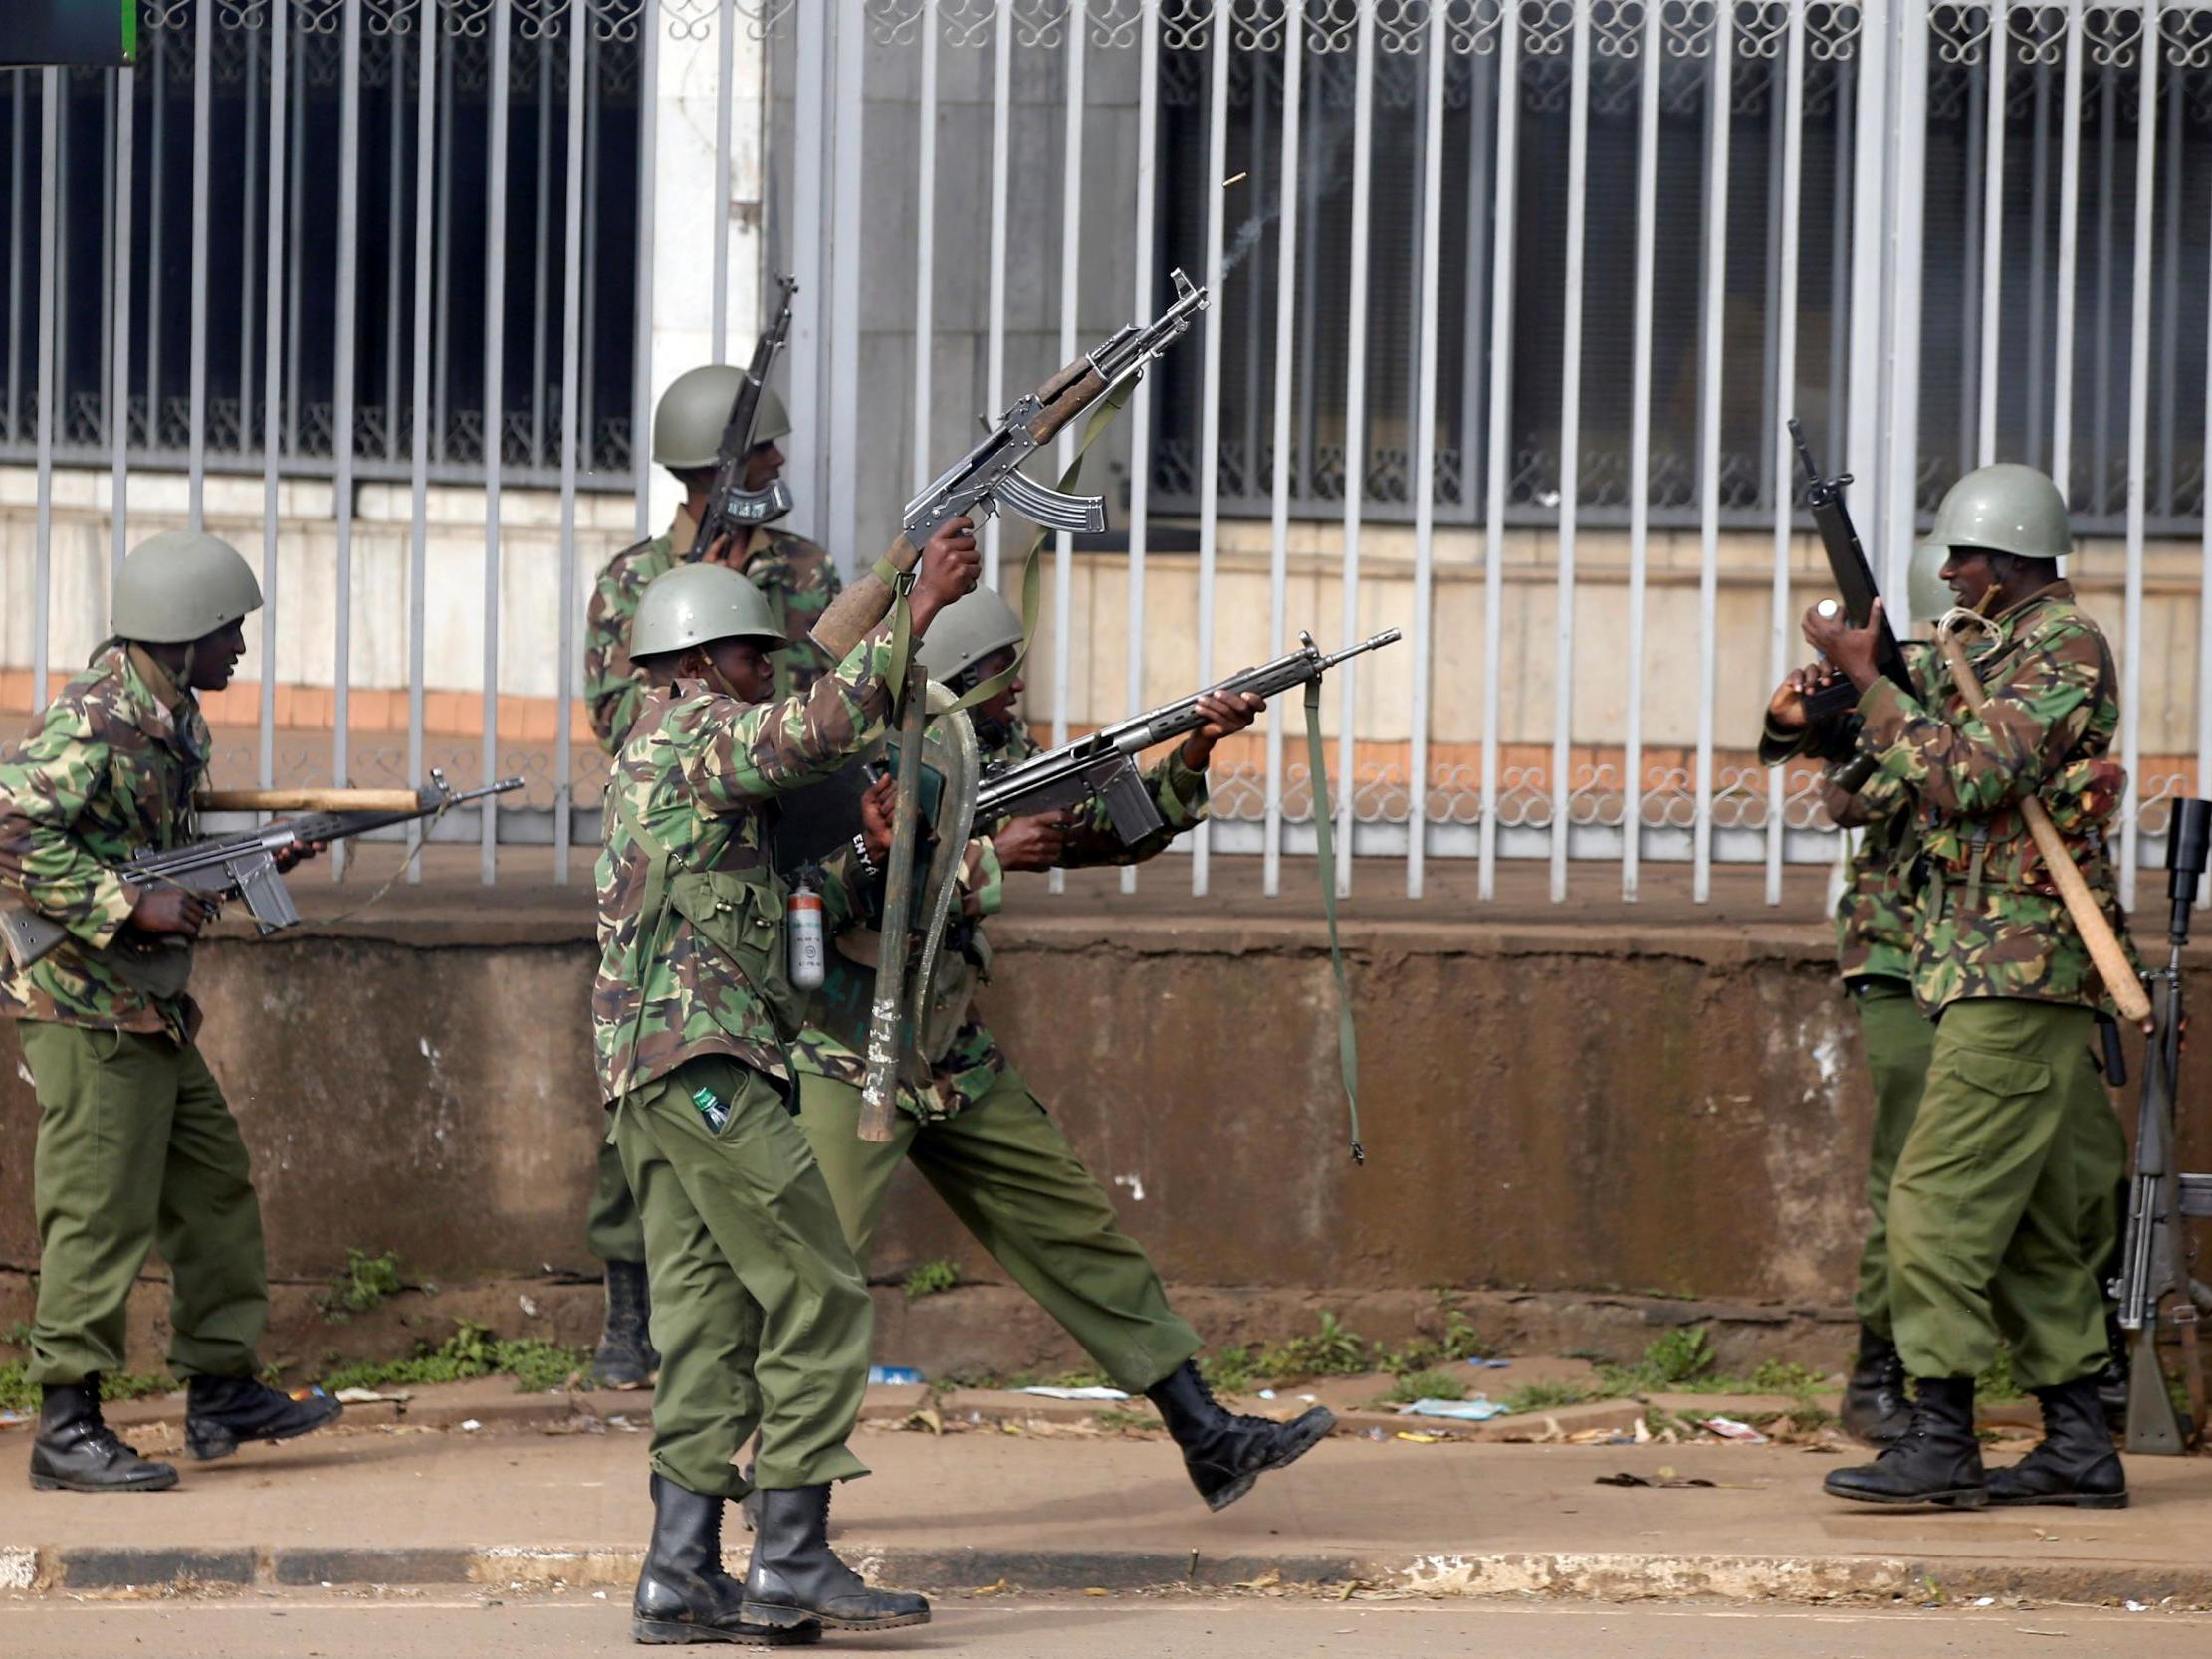 Anti-riot police fire live bullets into the air to disperse supporters of Kenya's opposition coalition in 2017.